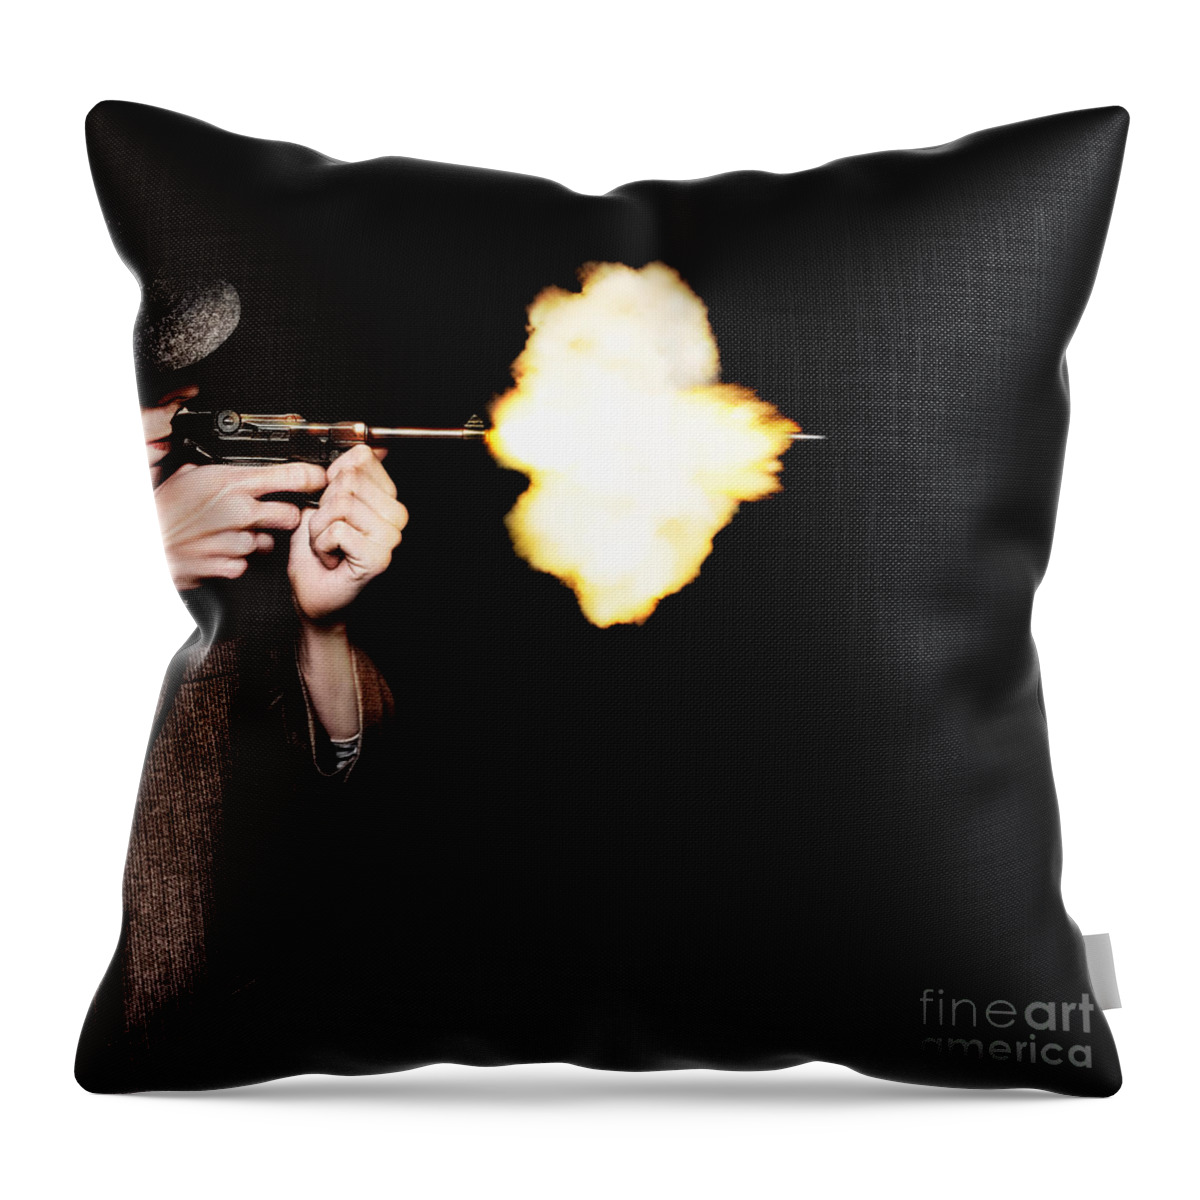 Gangster Throw Pillow featuring the photograph Vintage Gangster Man Shooting Gun On Black by Jorgo Photography